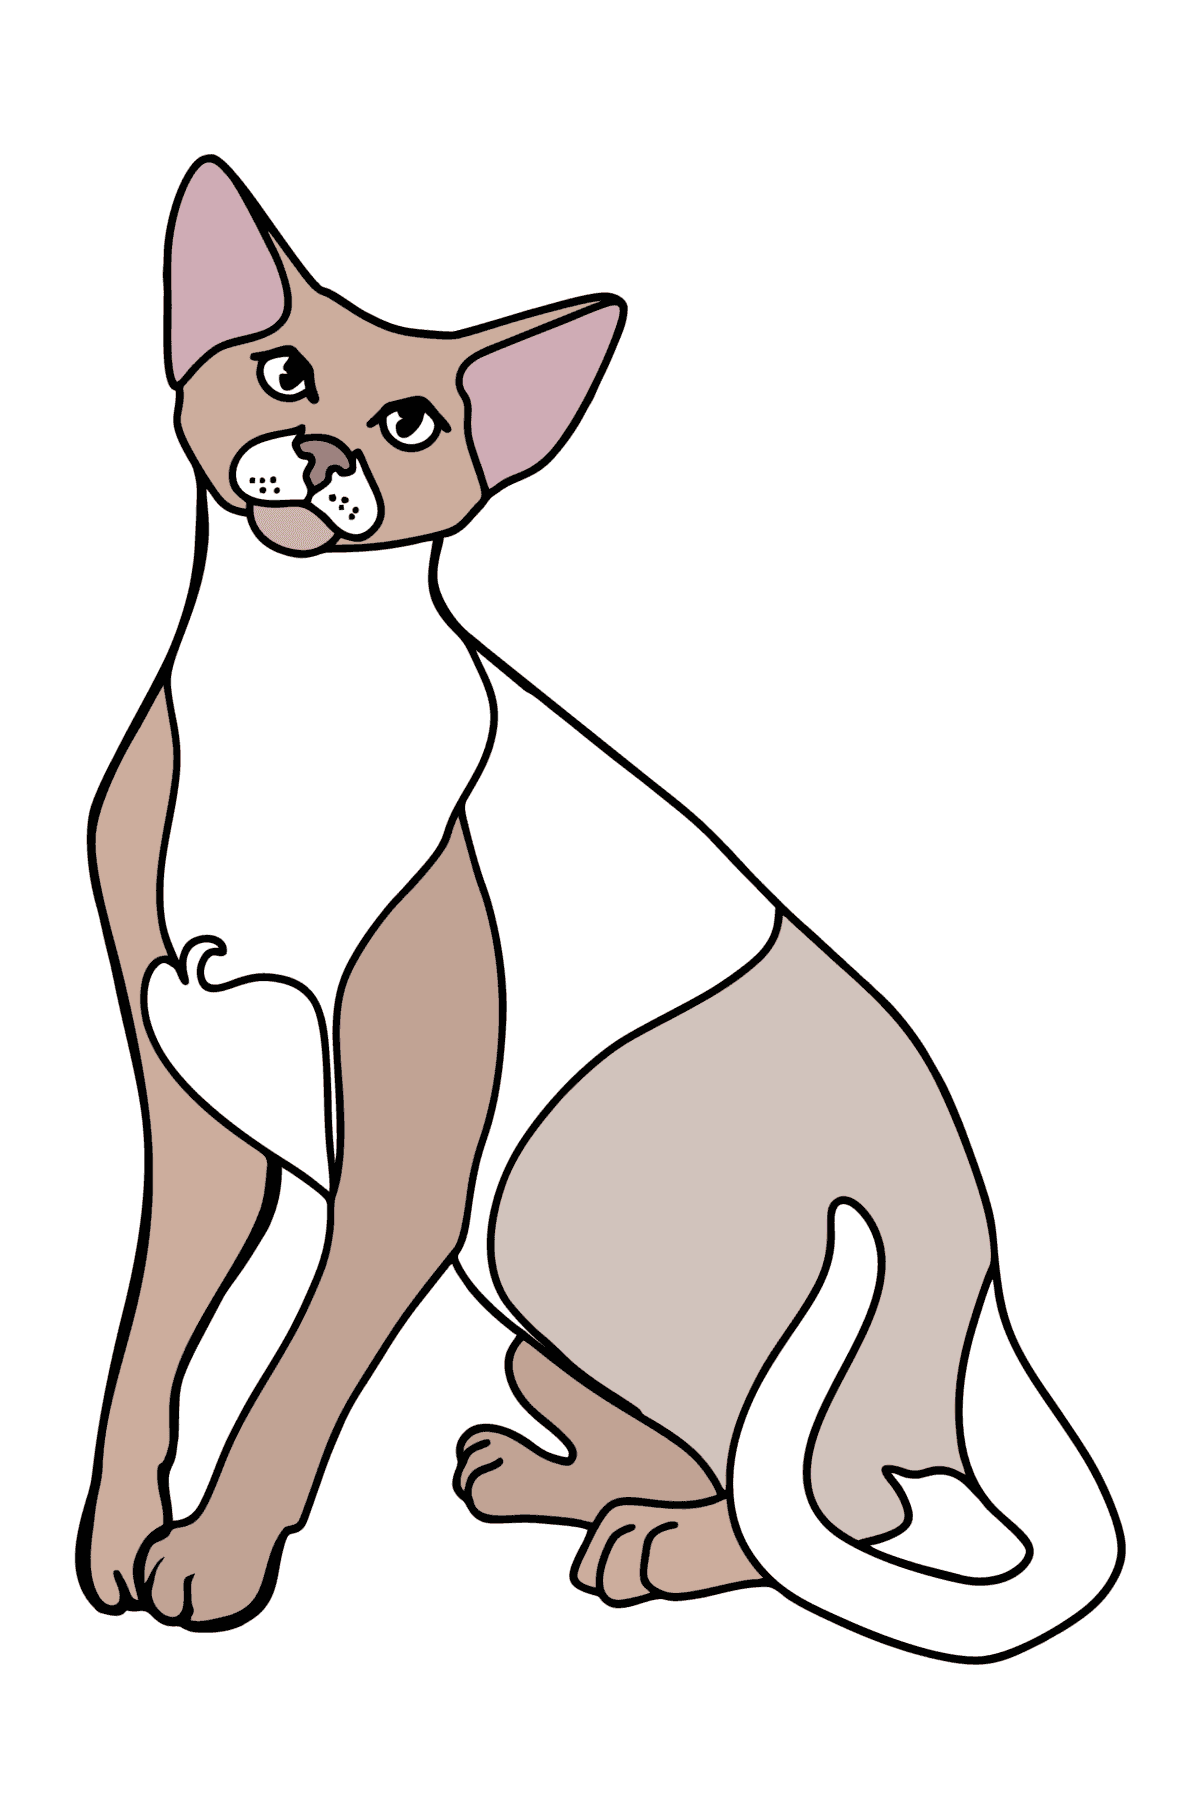 Oriental Shorthair Cat coloring page - Coloring Pages for Kids